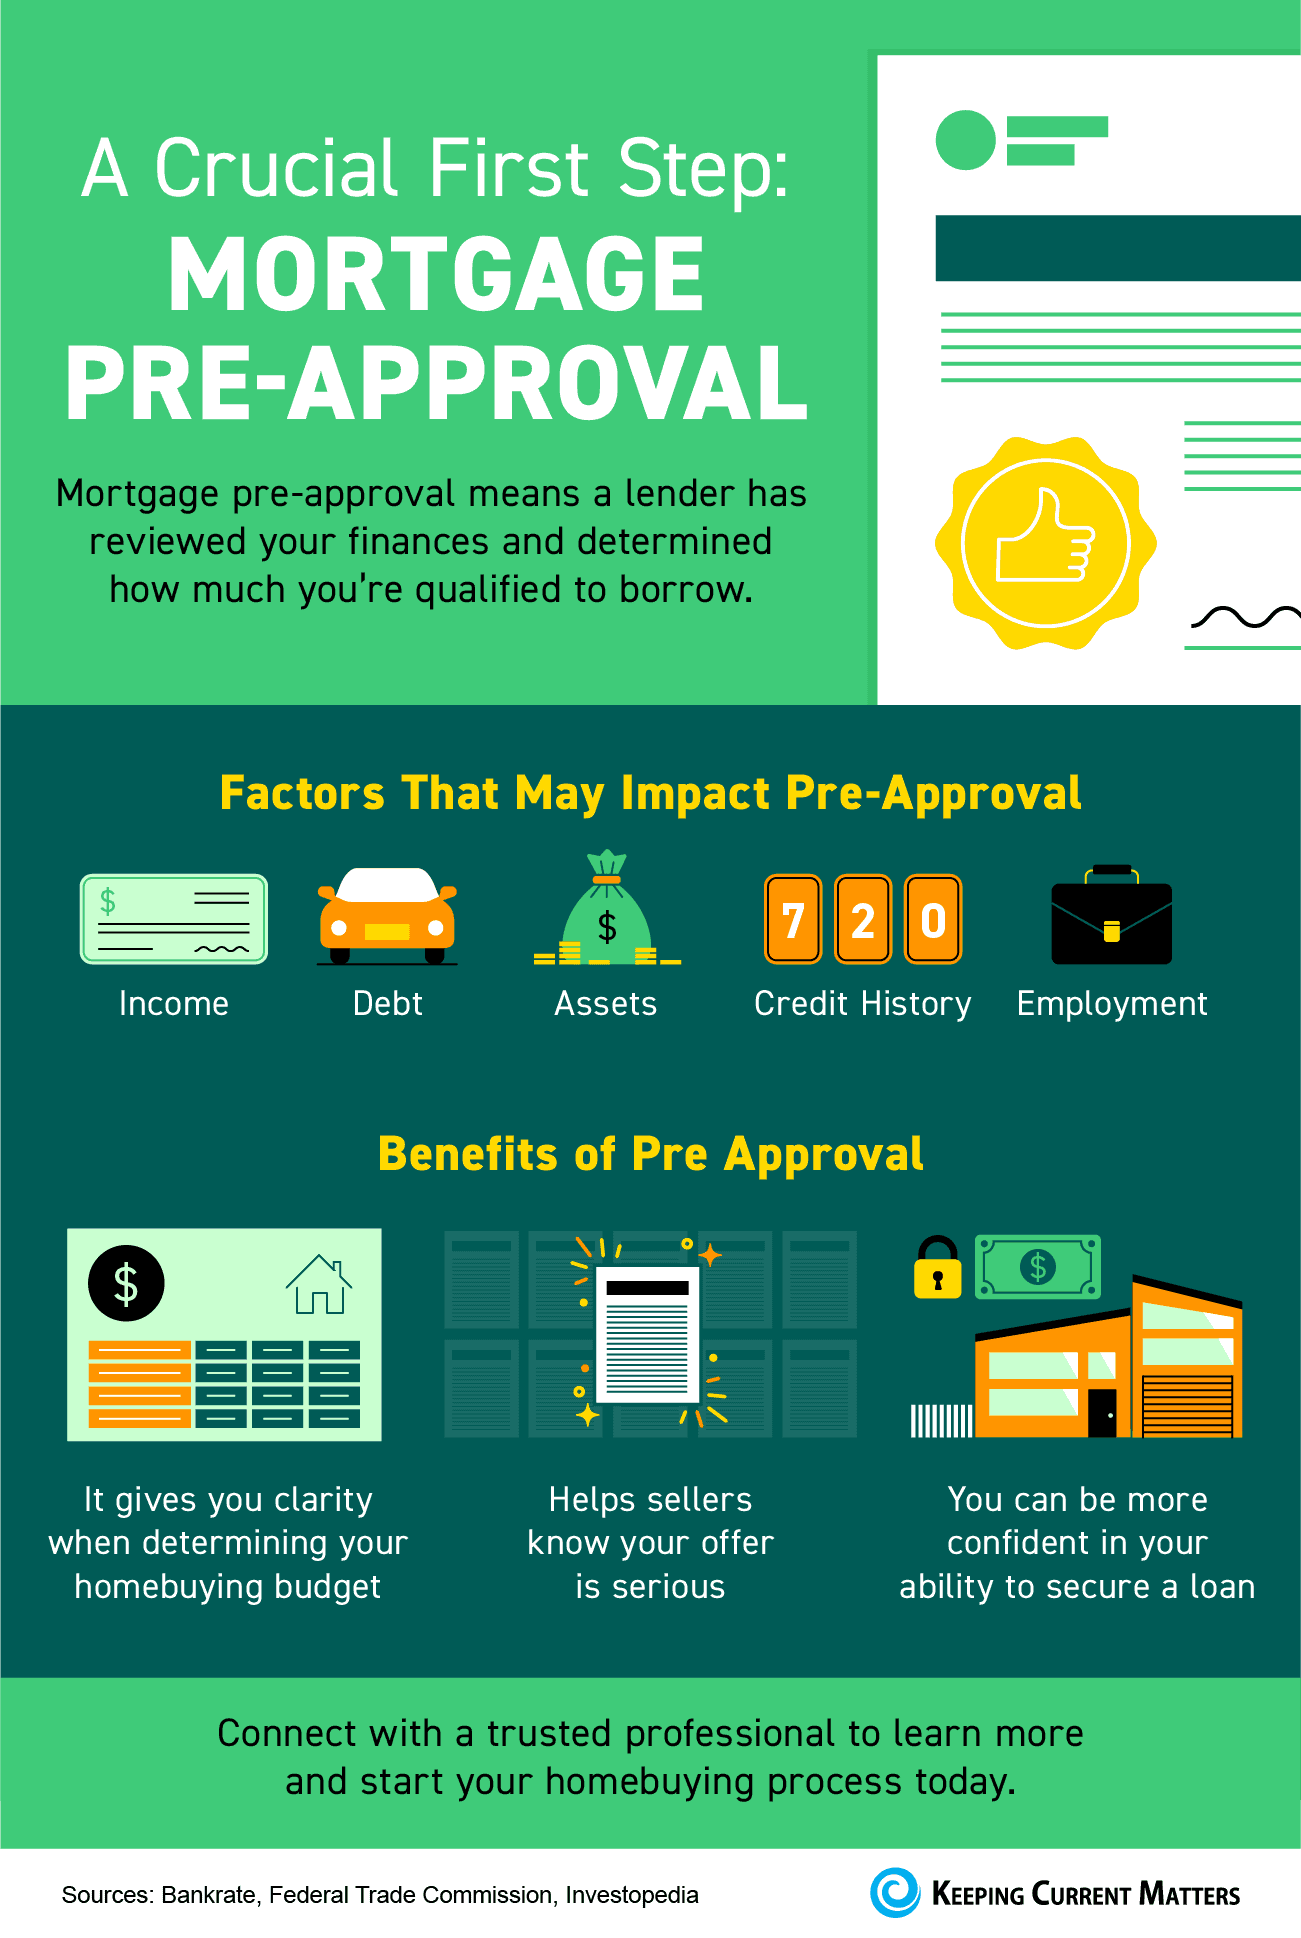 A Crucial First Step: Mortgage Pre-Approval